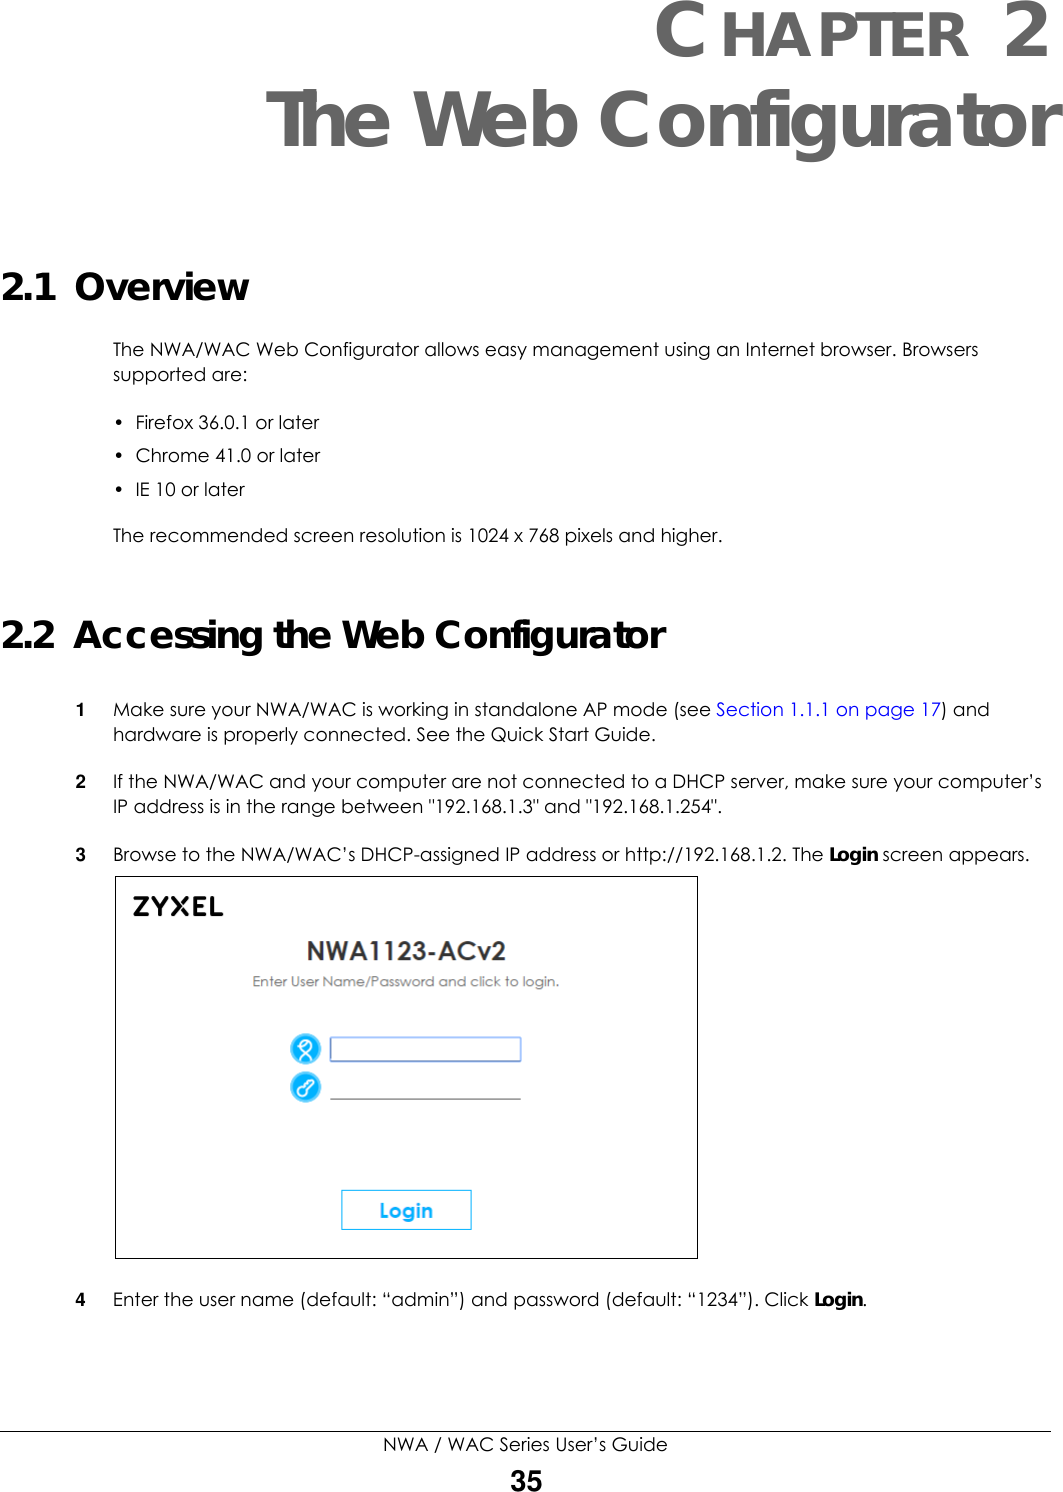 NWA / WAC Series User’s Guide35CHAPTER 2The Web Configurator2.1  OverviewThe NWA/WAC Web Configurator allows easy management using an Internet browser. Browsers supported are:• Firefox 36.0.1 or later• Chrome 41.0 or later• IE 10 or laterThe recommended screen resolution is 1024 x 768 pixels and higher.2.2  Accessing the Web Configurator1Make sure your NWA/WAC is working in standalone AP mode (see Section 1.1.1 on page 17) and hardware is properly connected. See the Quick Start Guide.2If the NWA/WAC and your computer are not connected to a DHCP server, make sure your computer’s IP address is in the range between &quot;192.168.1.3&quot; and &quot;192.168.1.254&quot;.3Browse to the NWA/WAC’s DHCP-assigned IP address or http://192.168.1.2. The Login screen appears. 4Enter the user name (default: “admin”) and password (default: “1234”). Click Login. 